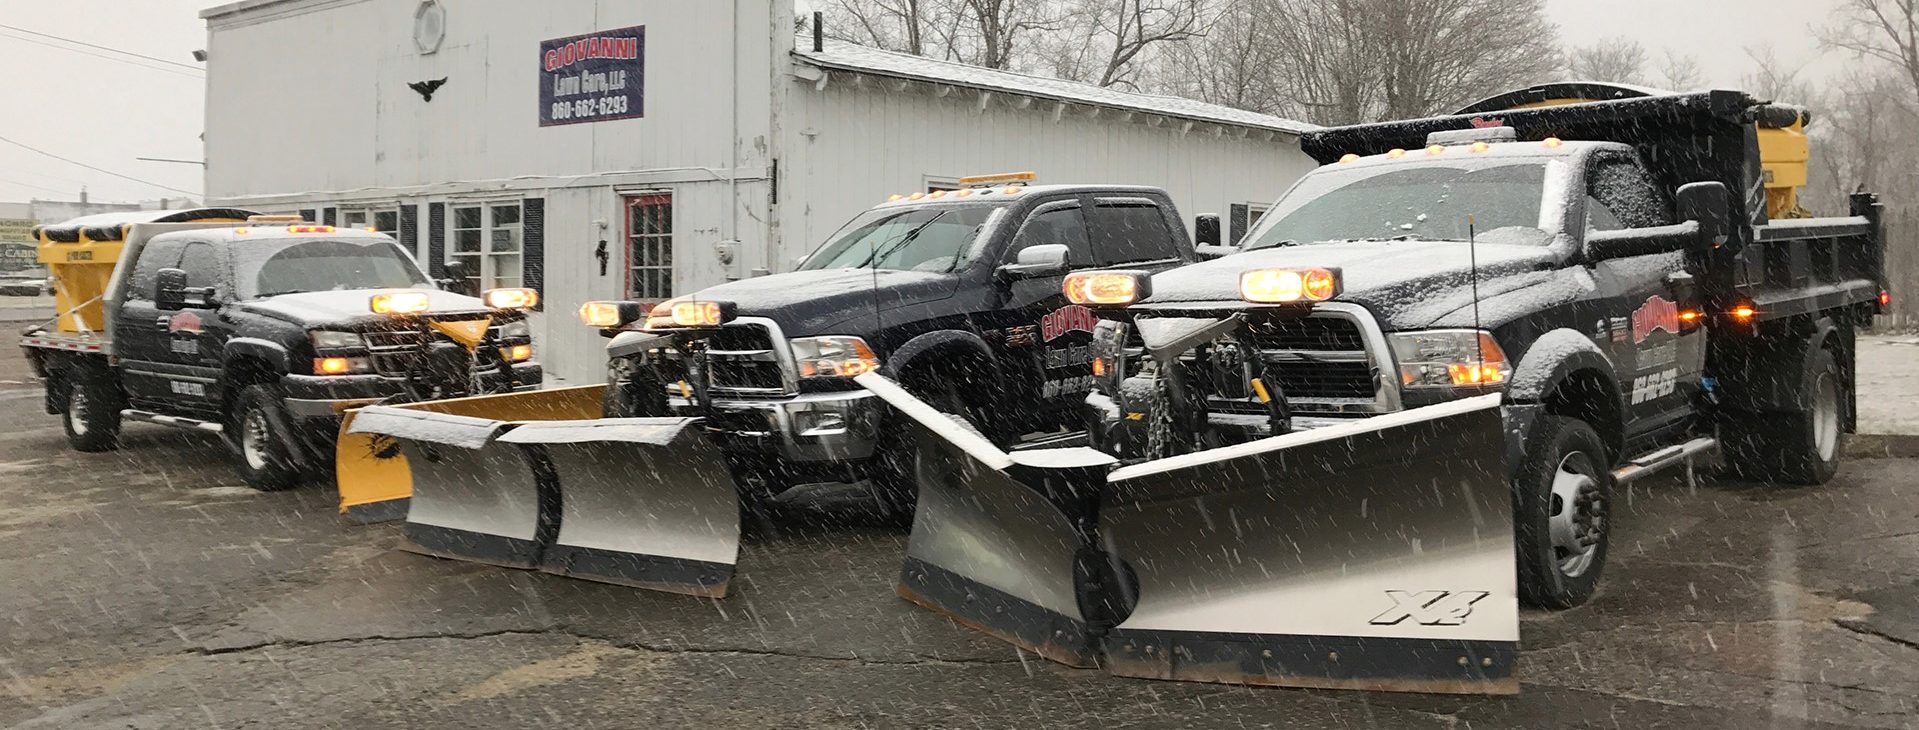 Snow and Ice removal services can be customized to fit your level of need.